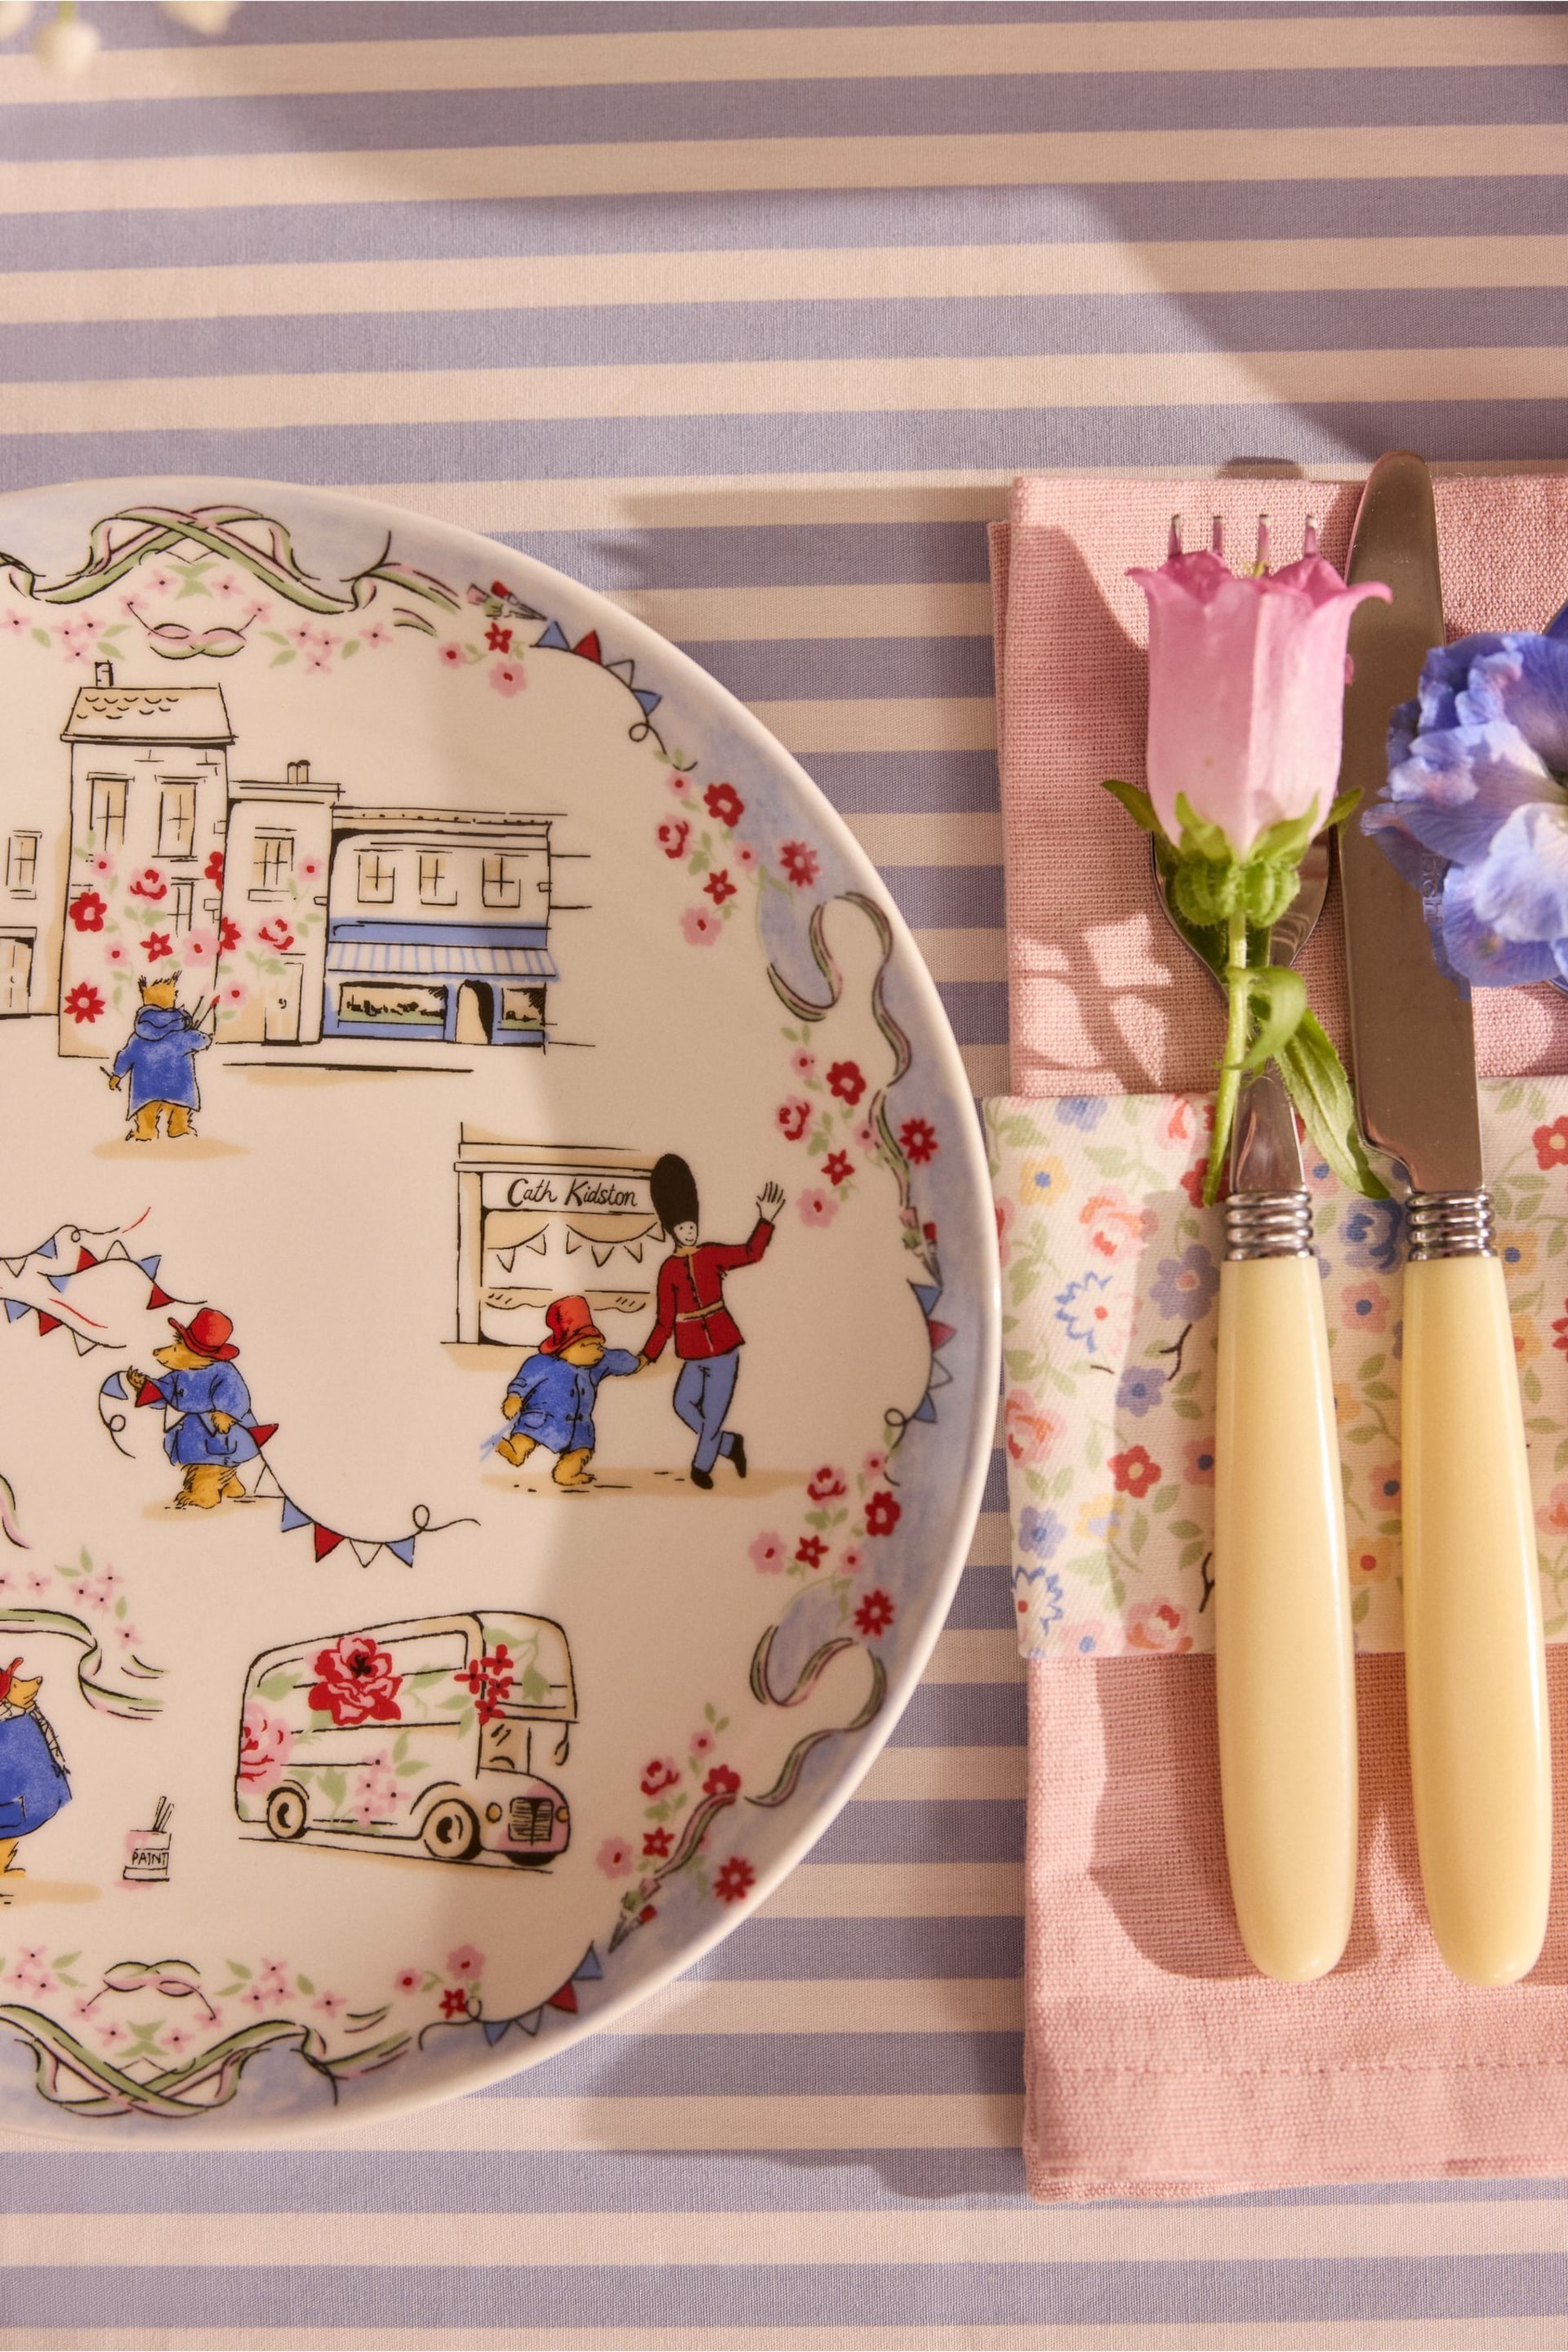 Cath Kidston Multi Paddington Goes to Town Side Plate - Image 14 of 15